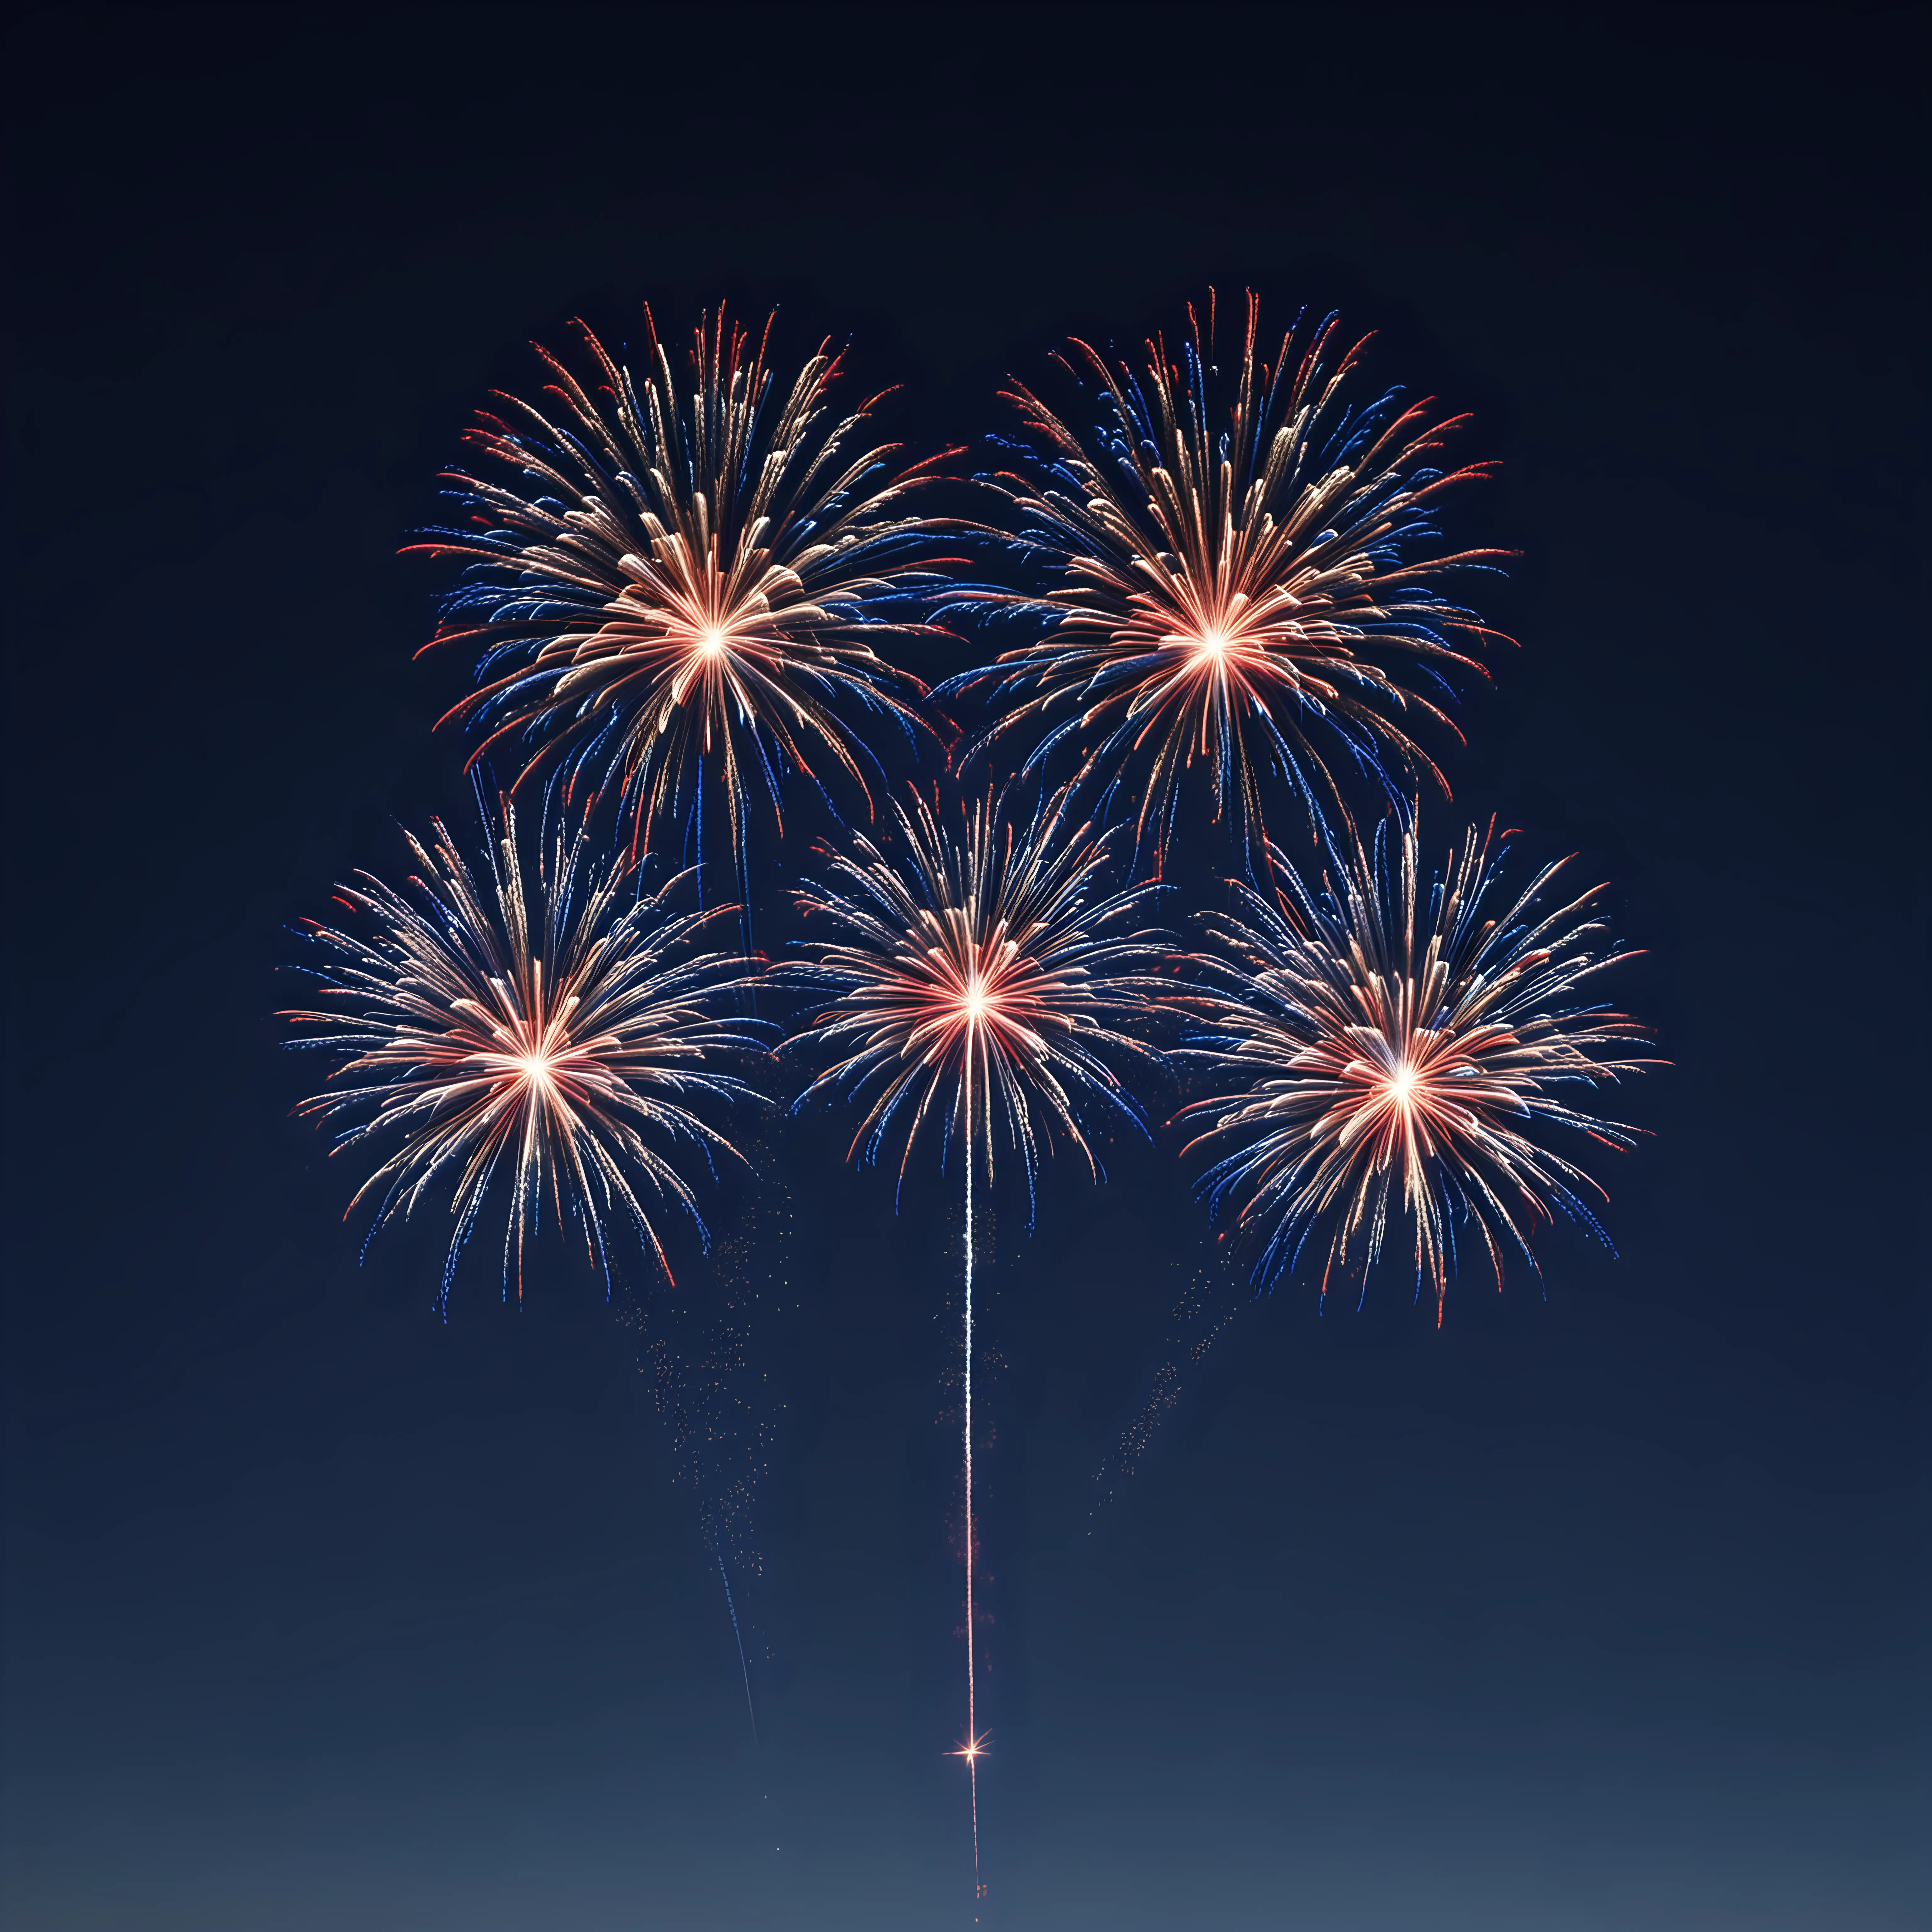 Three Glowing Red White and Blue Fireworks Illuminating Bold Blue Night Sky